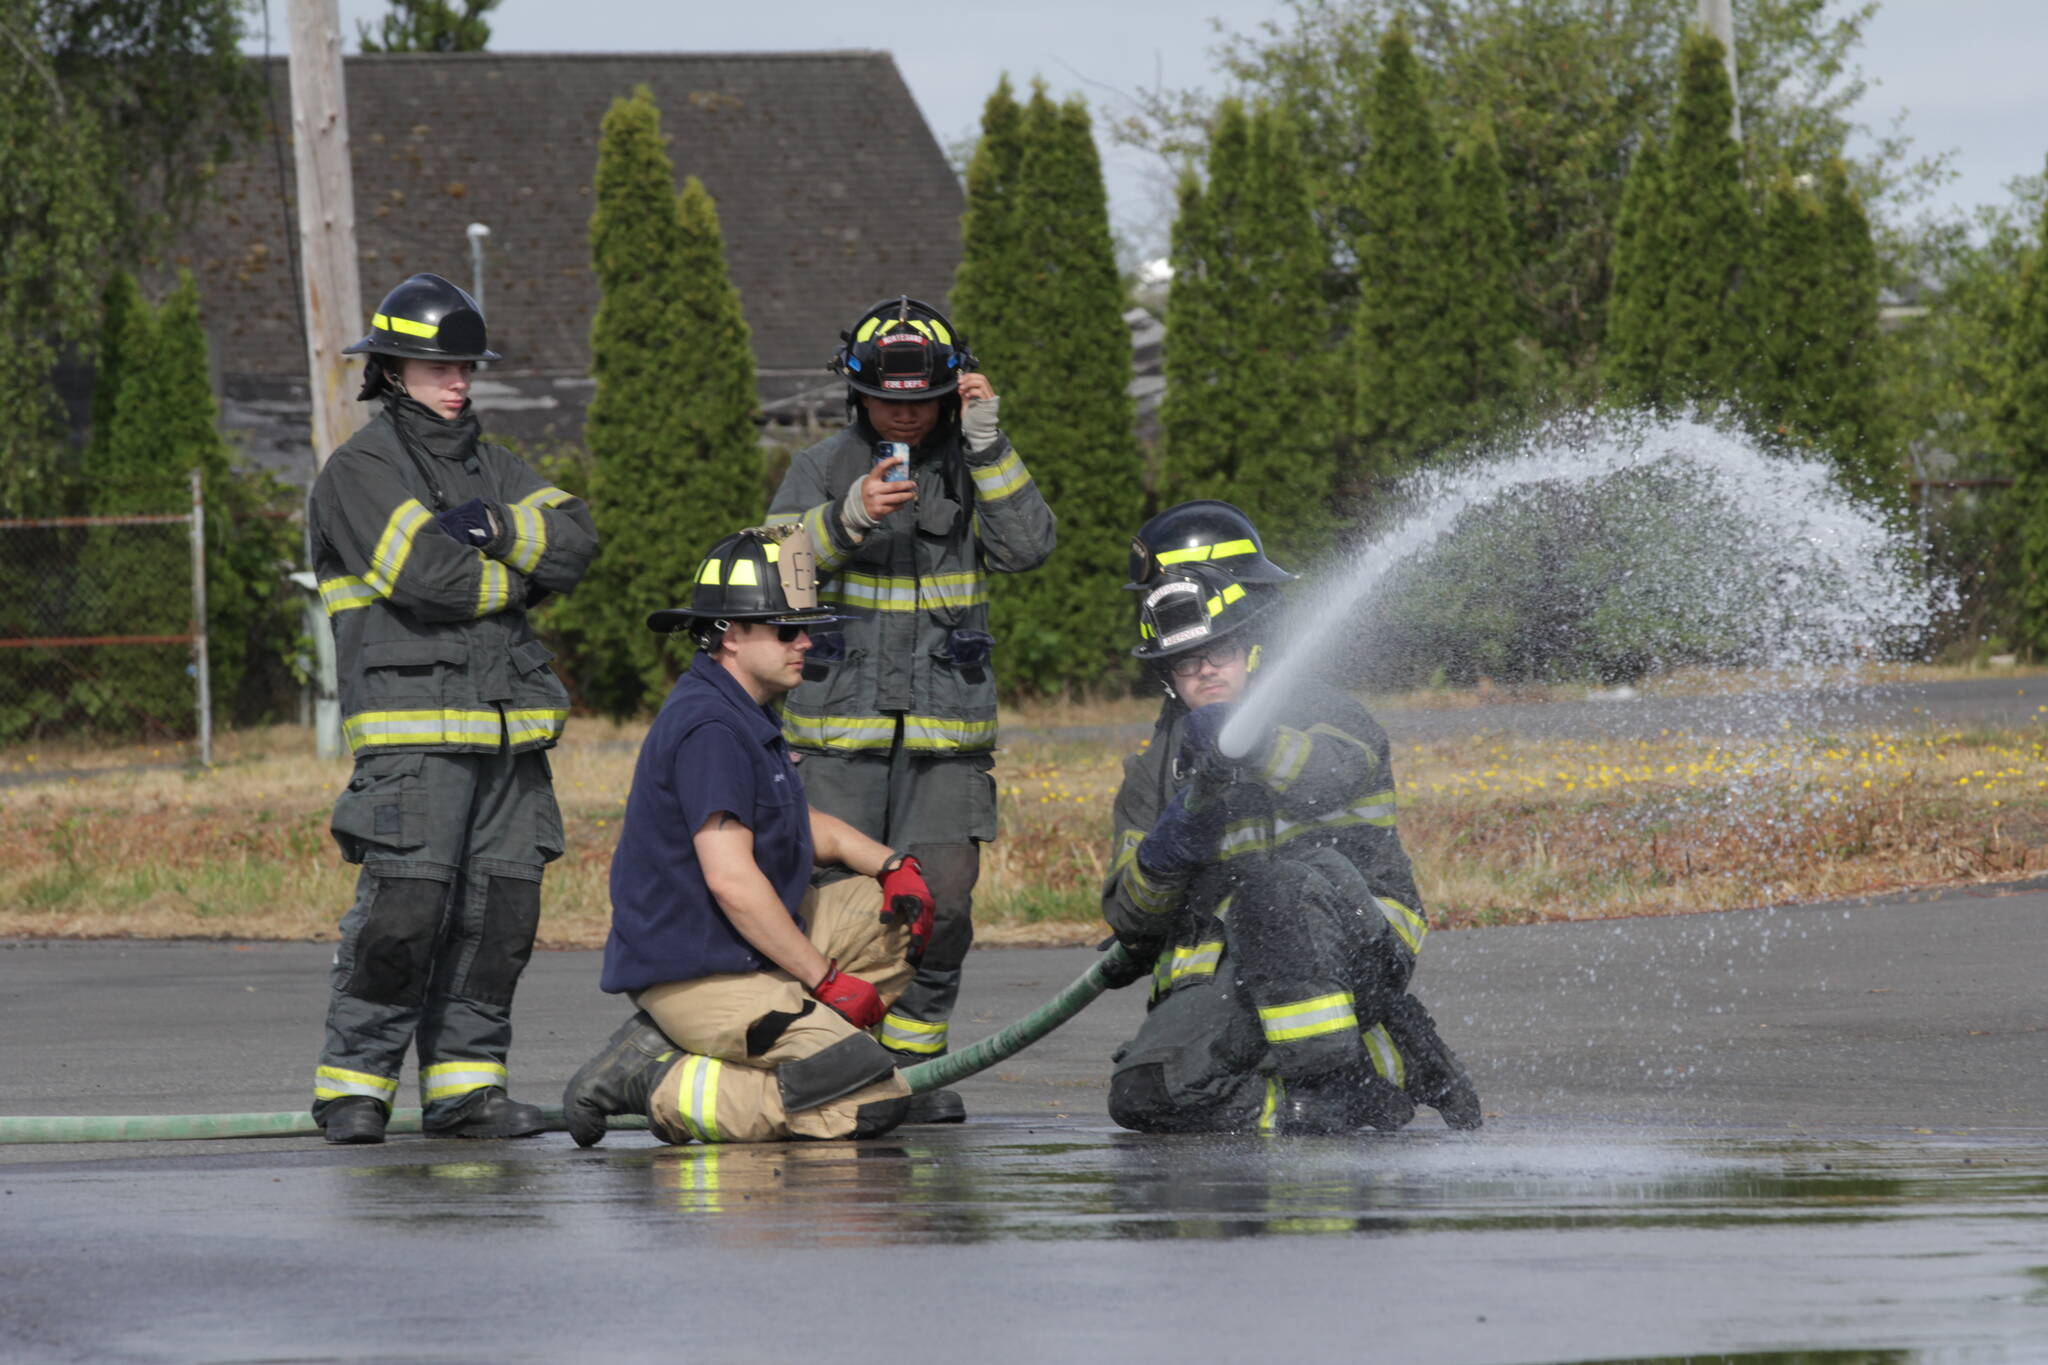 Derek Jensen of the Hoquiam Fire Department, in blue T-shirt, teaches a group of high schoolers taking part in a fire science program about using a firehose on July 13. (Michael S. Lockett / The Daily World)